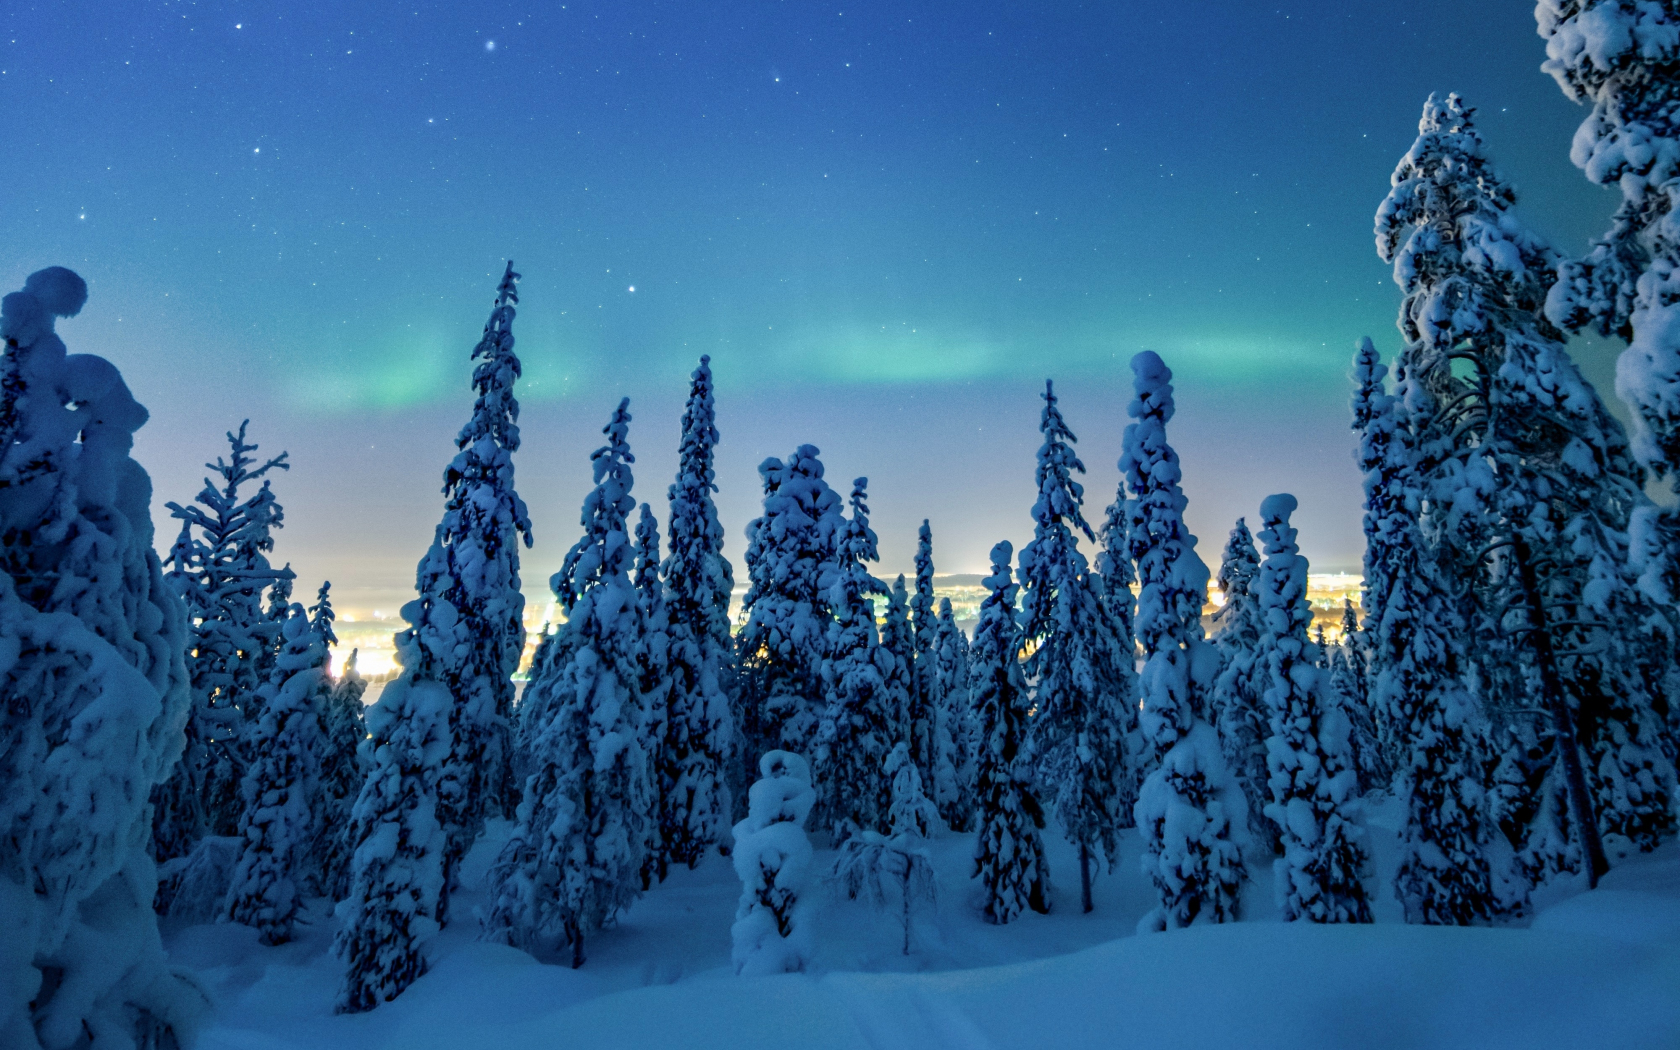 Download wallpaper 1680x1050 winter, dawn, colorful sky, trees, 16:10 widescreen 1680x1050 HD background, 23743